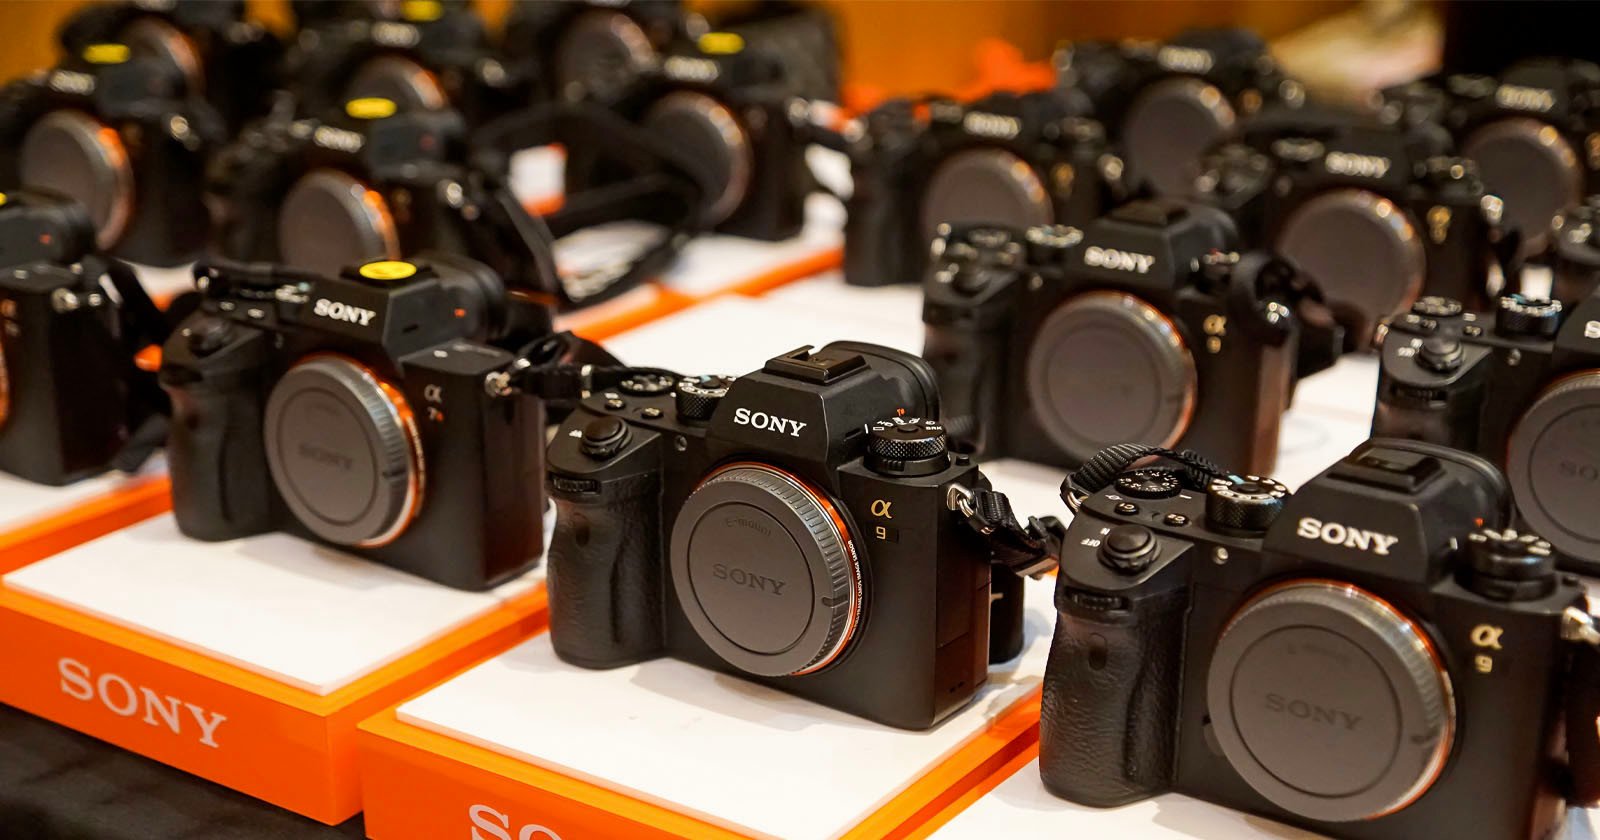  average digital camera price has doubled over 